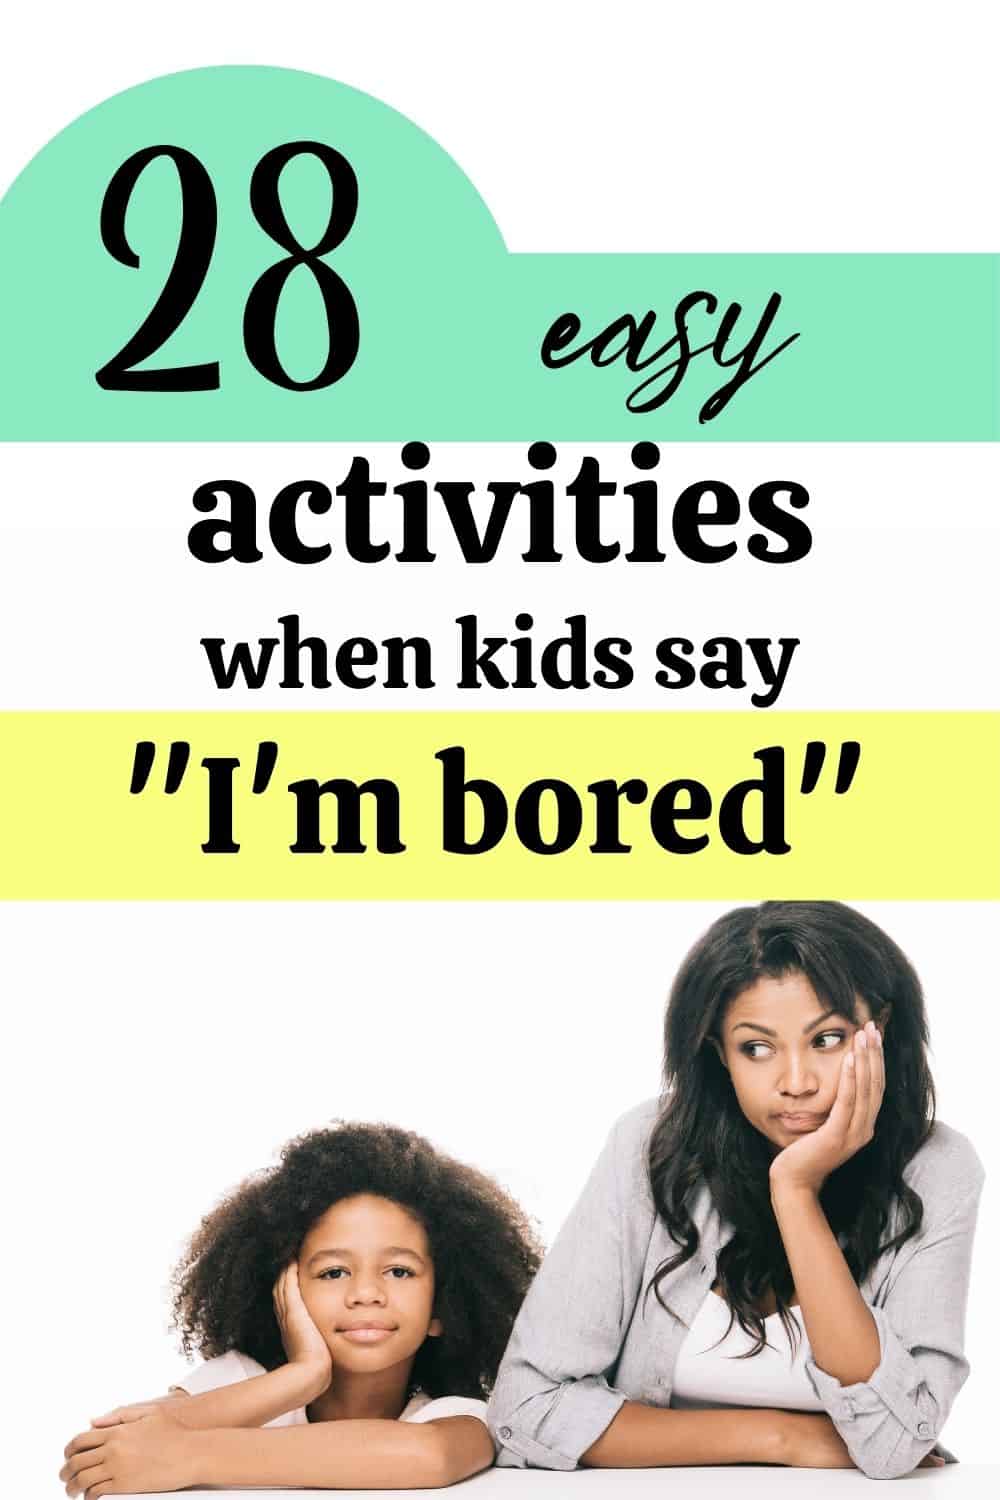 20 easy activities when kids say I'm bored in text with image of bored mom and daughter